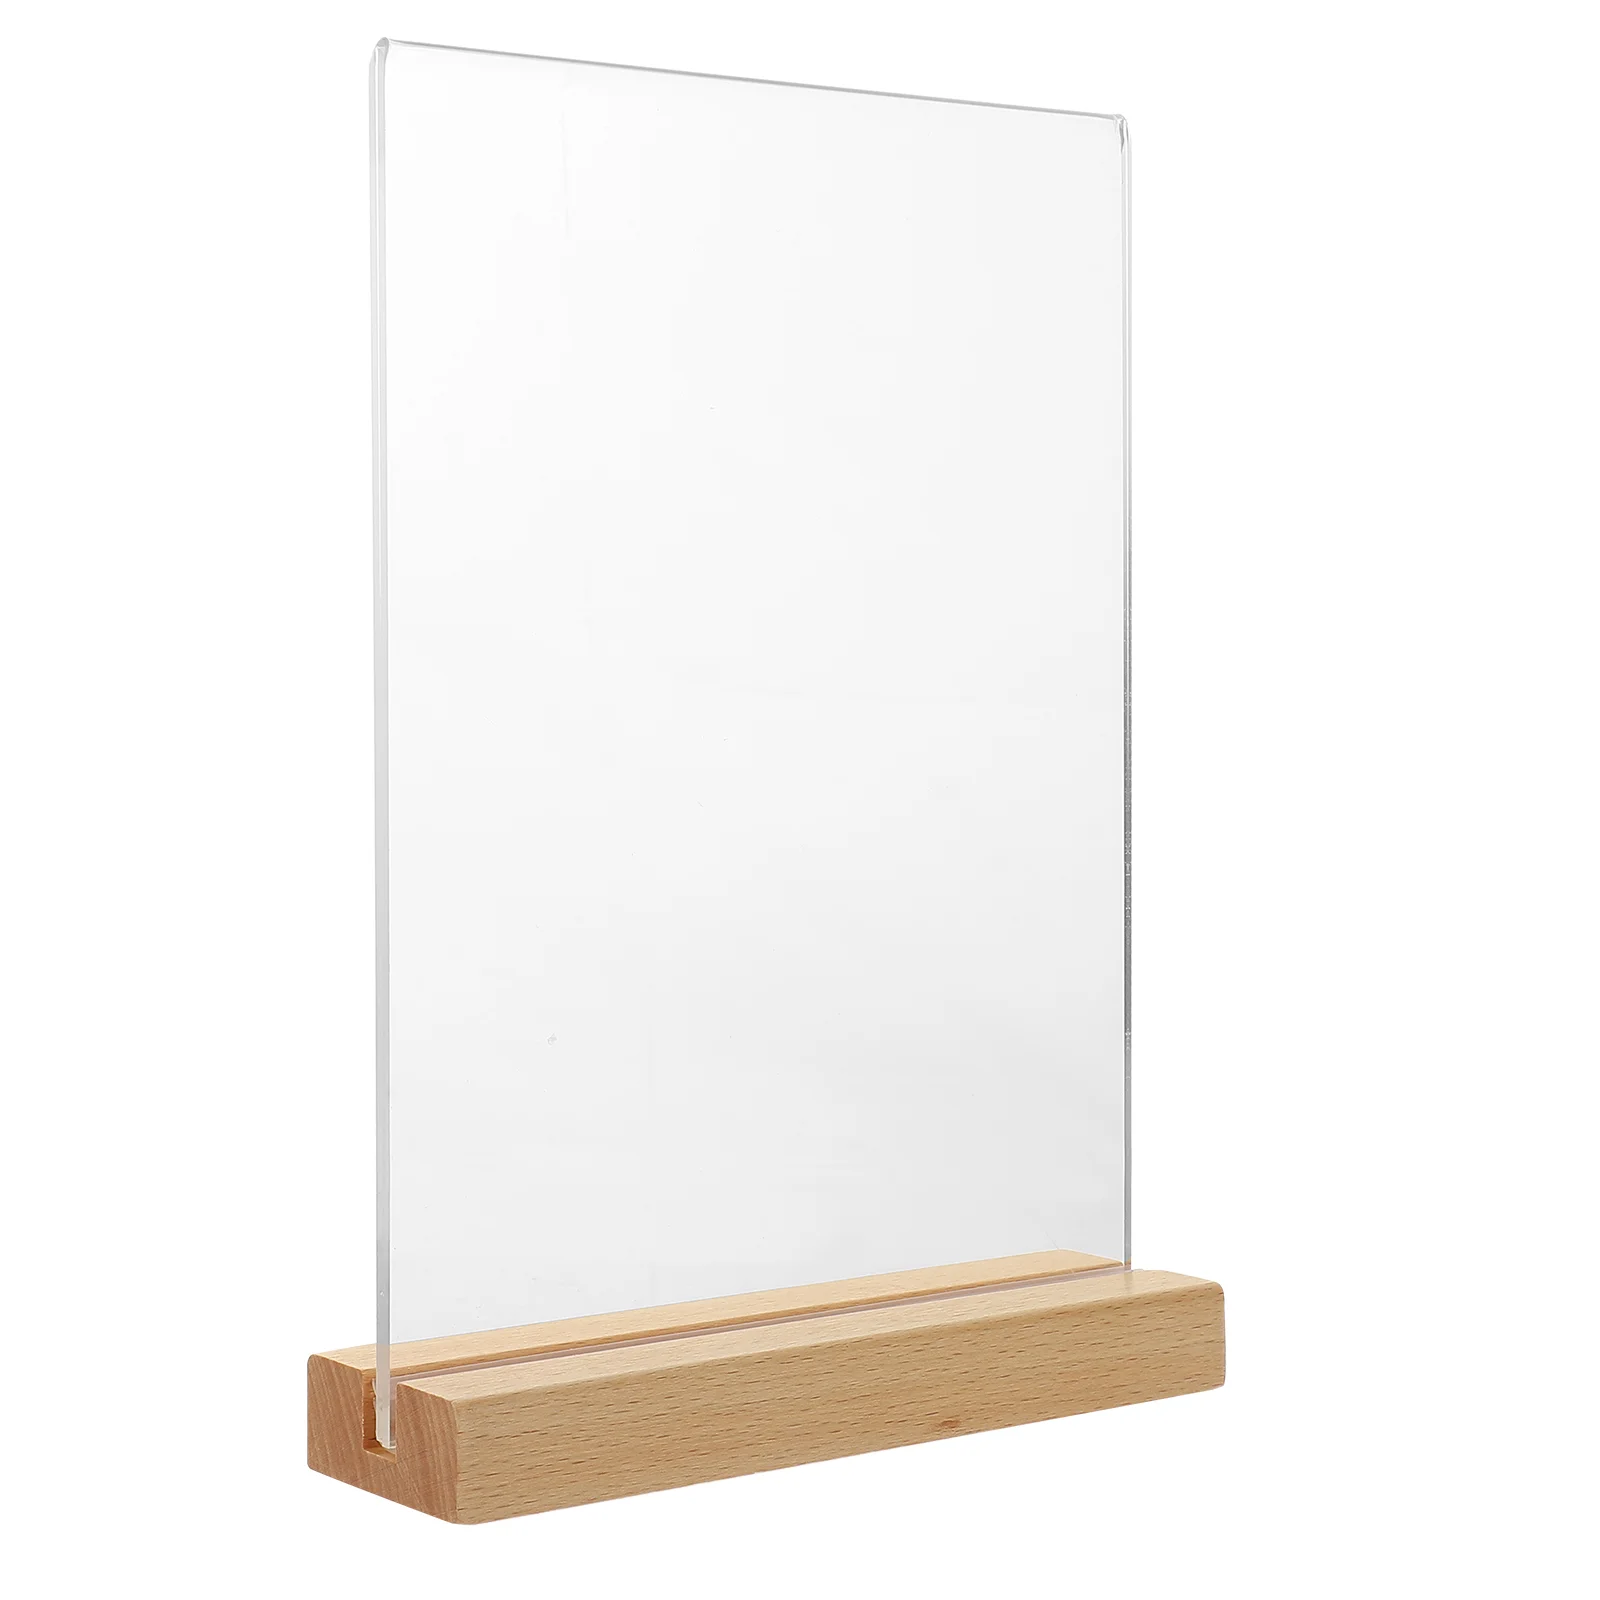 Acrylic Label Stand Menu Sign Holder Picture Frame Table Poster Stands Display Rack acrylic label stand menu sign holder picture frame table poster stands display rack